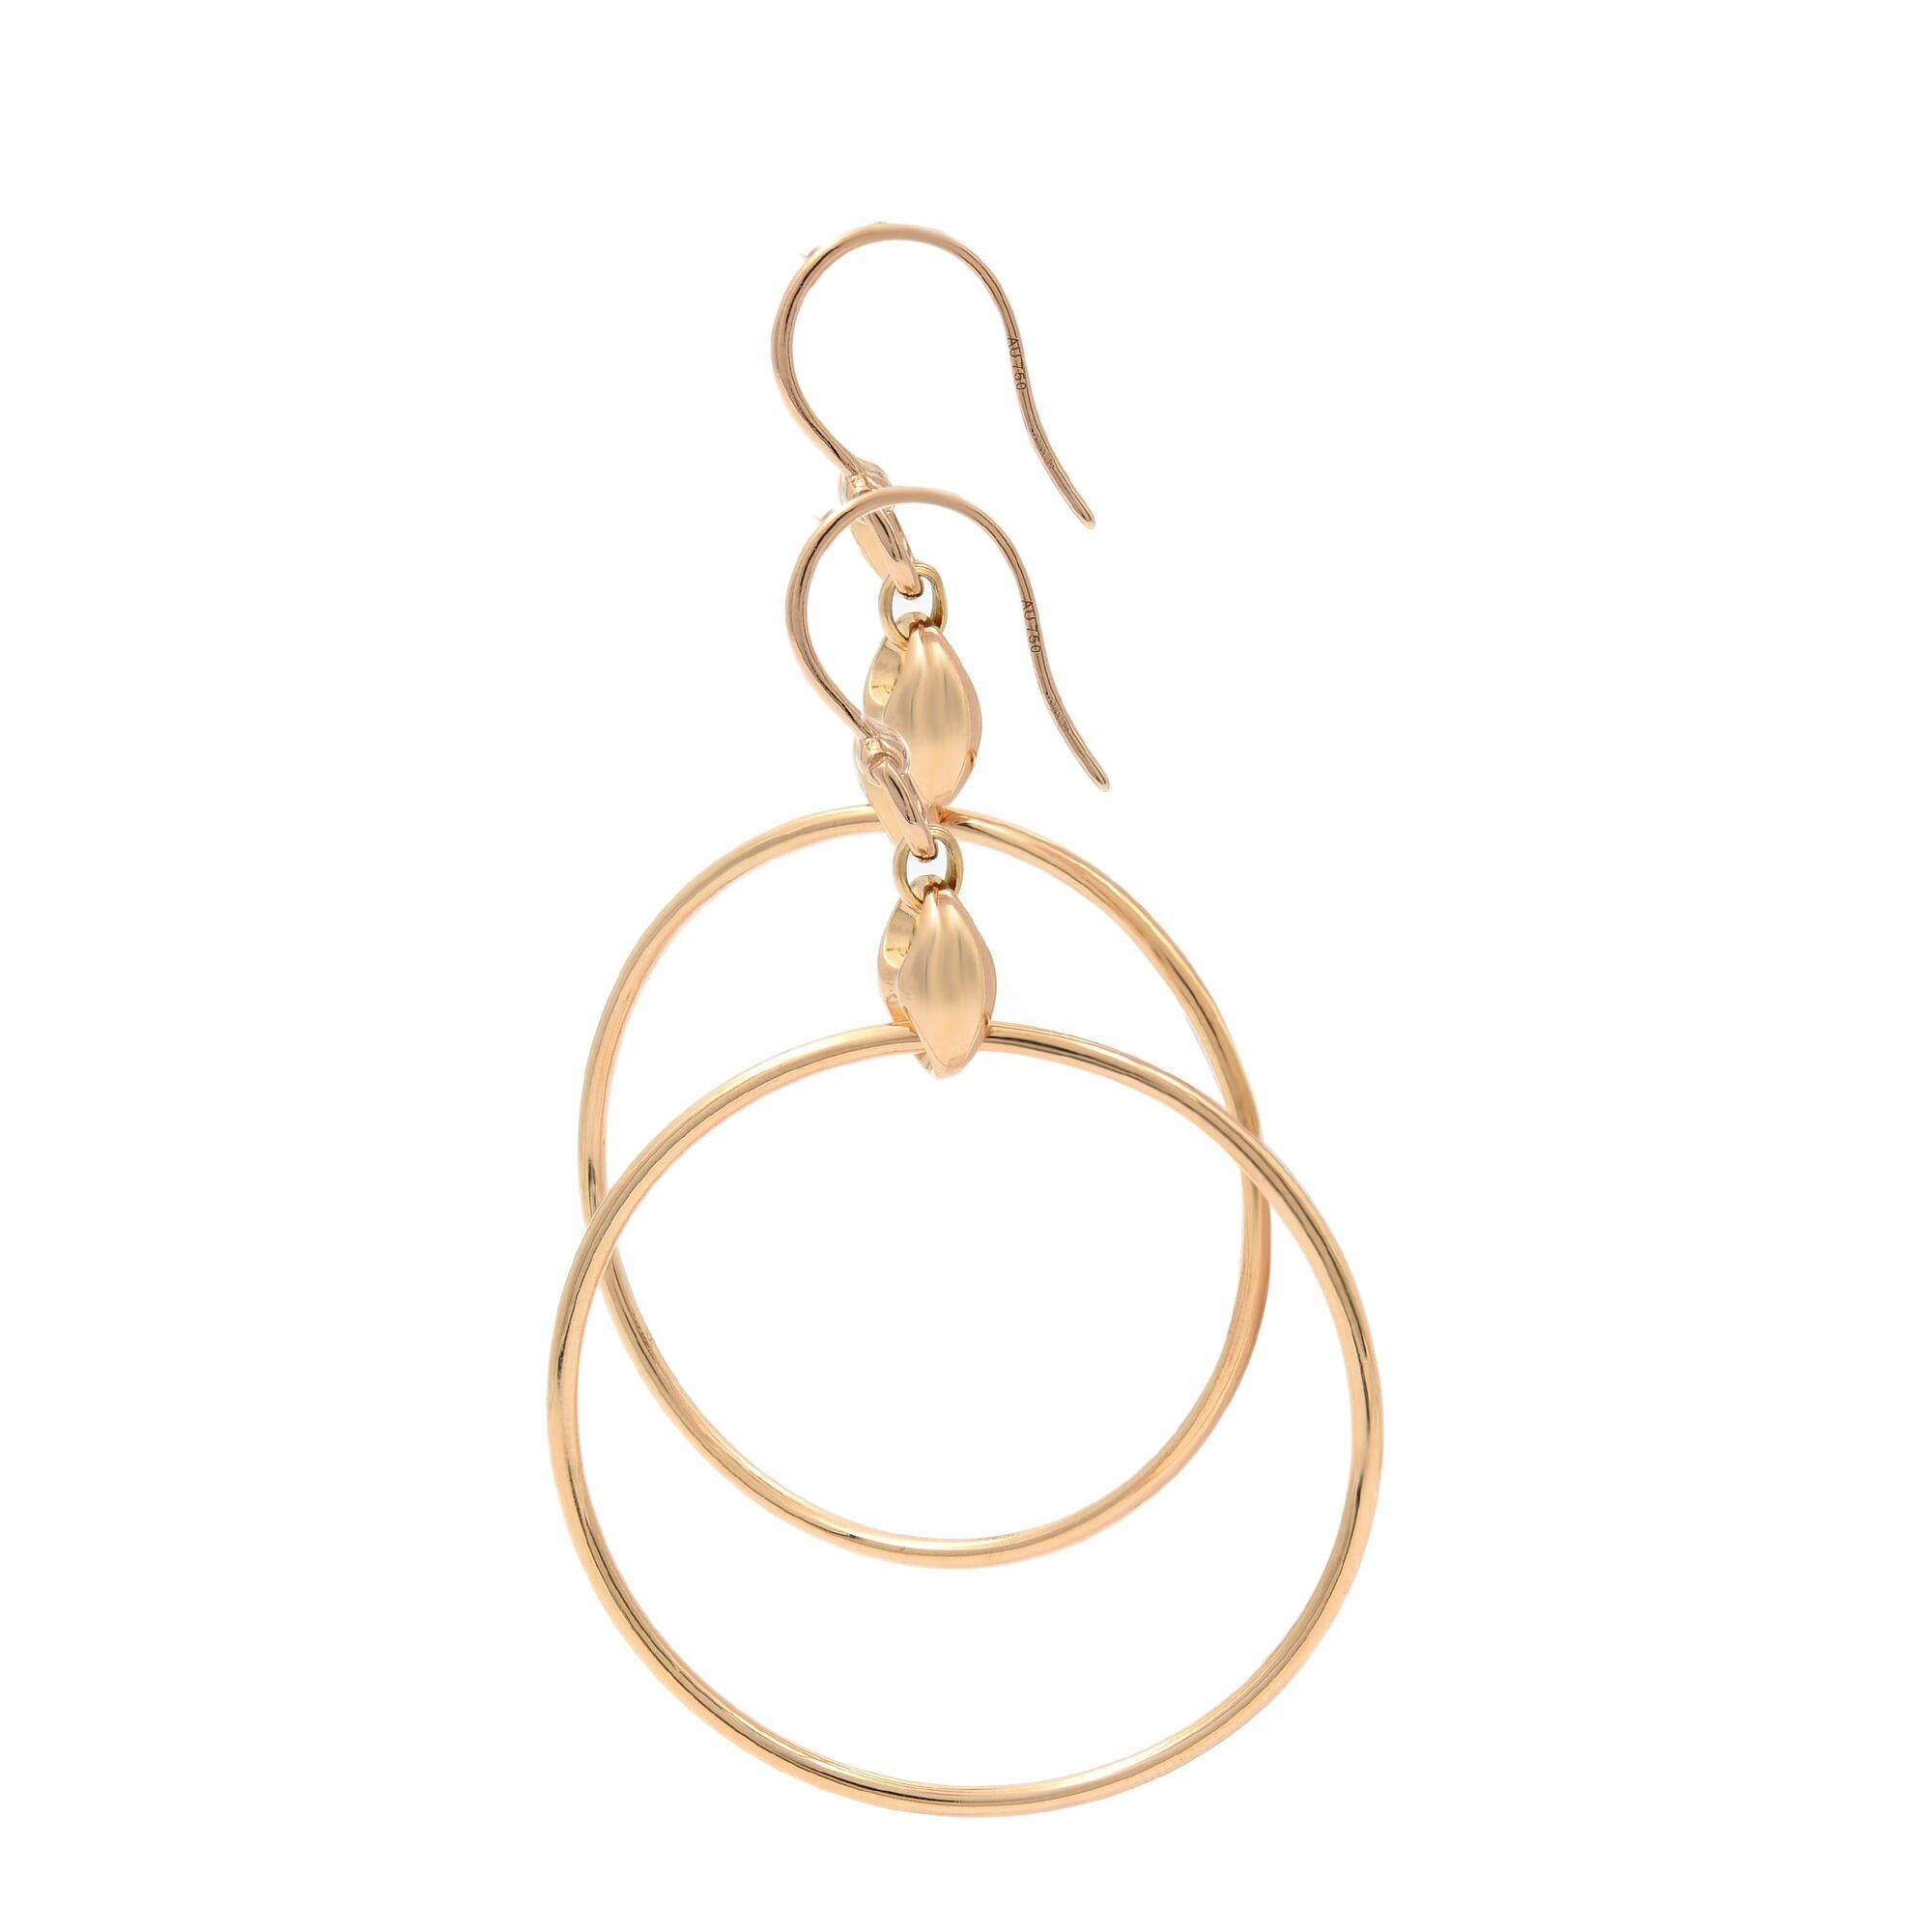 Gucci 18k Rose Gold Hoop Earrings. The Dimensions Are 62mm X 37mm. A Gold Hoop Hangs From A Marina Chain Link, Which Hangs From A Horsebit Link. 
Excellent pre-owned condition. Come in a little Gucci pouch. 